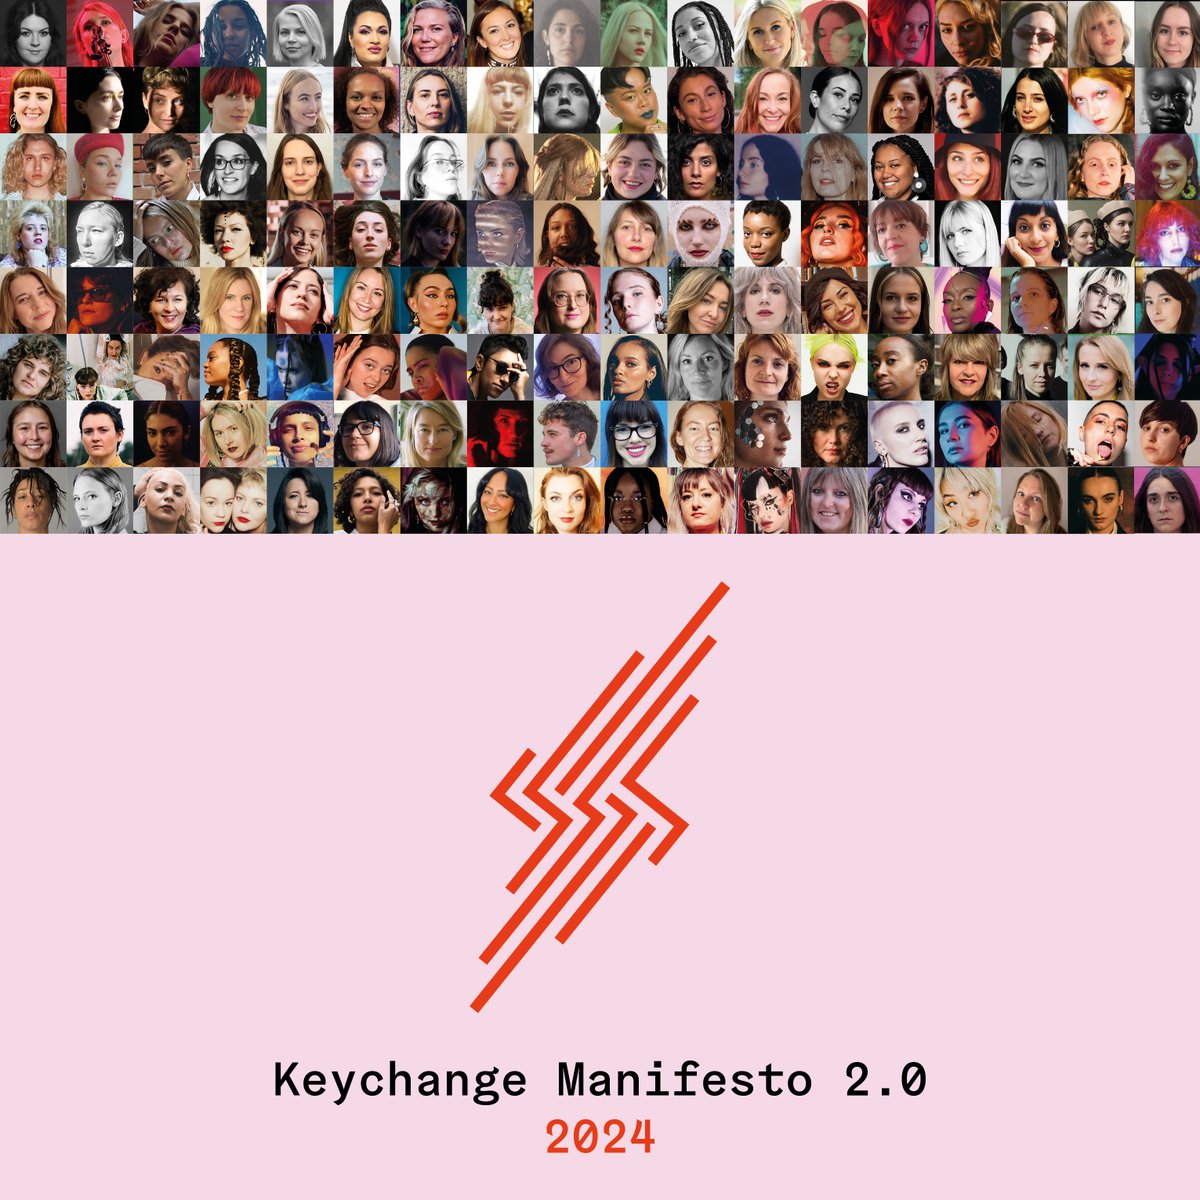 ⚡Report: Keychange Manifesto 2.0⚡ Today we launched our Manifesto 2.0 @Tlnmusicweek! From creating safer spaces to tackling the gender pay gap, promoting intersectional representation & more, read the full report here: tiny.cc/keychangemanif… @musikcentrumost @PRSFoundation